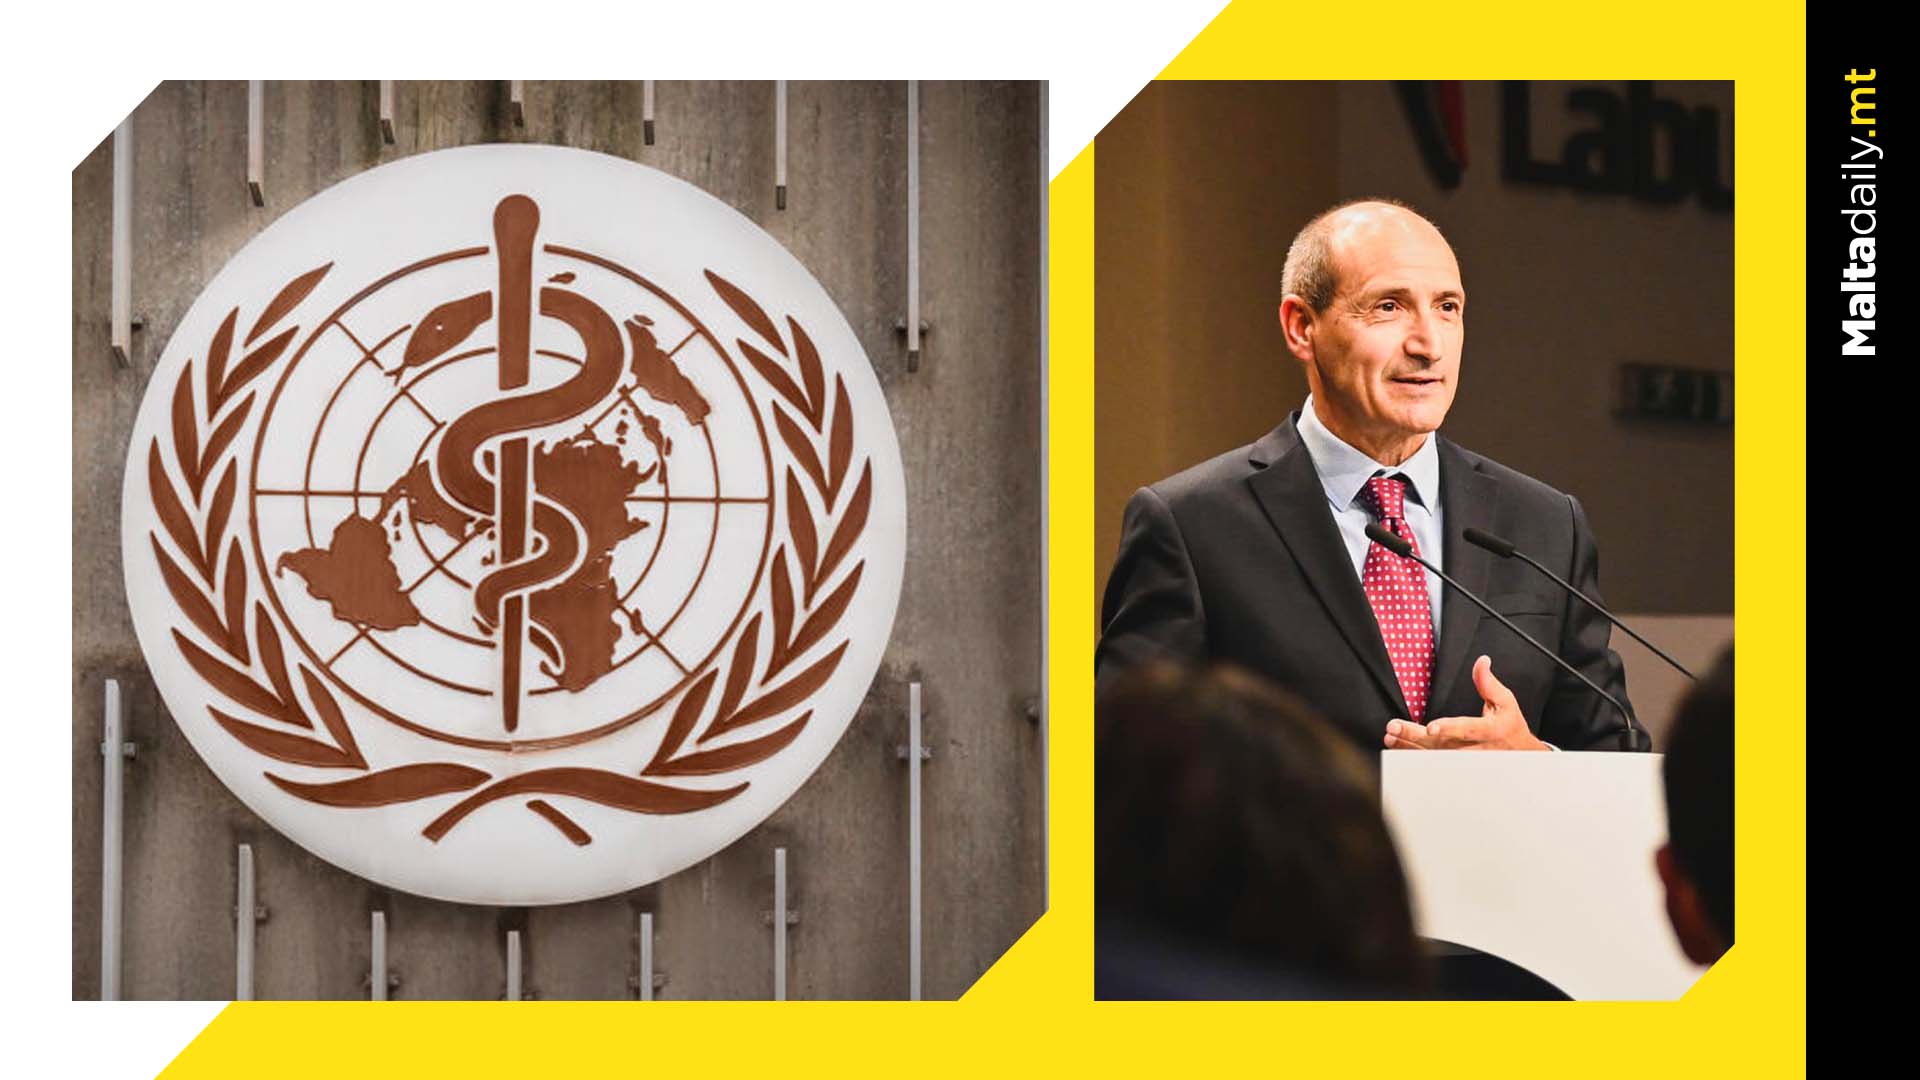 Chris Fearne nominated for World Health Assembly Presidency